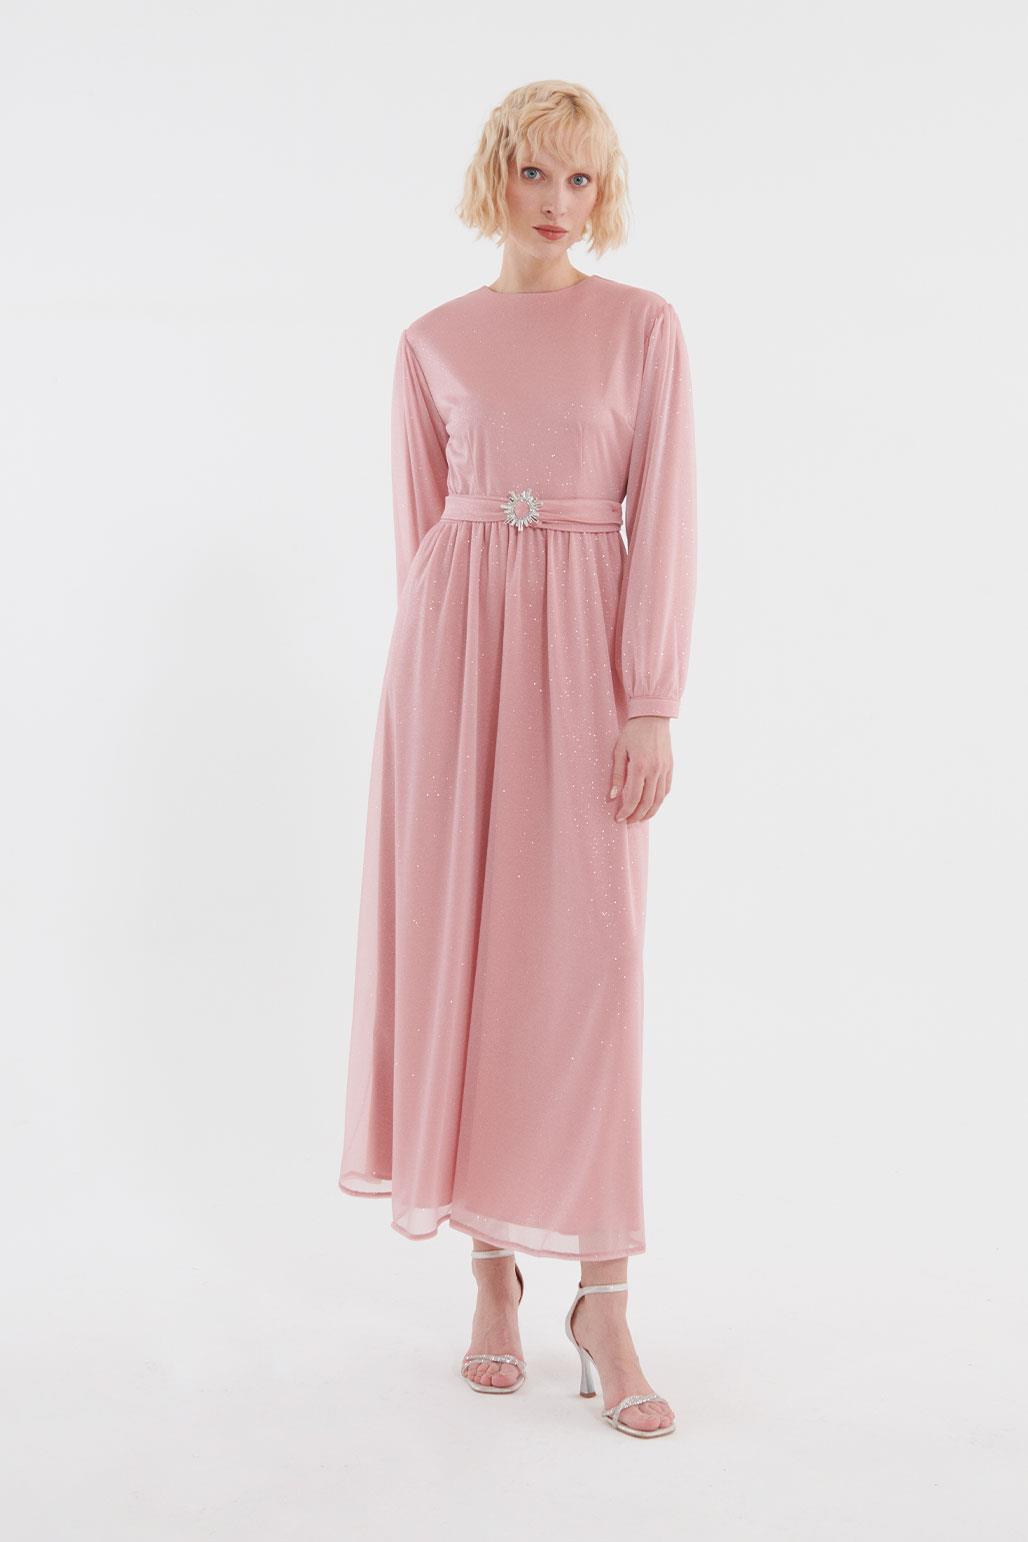 Silvery Stone Belted Dress Pink